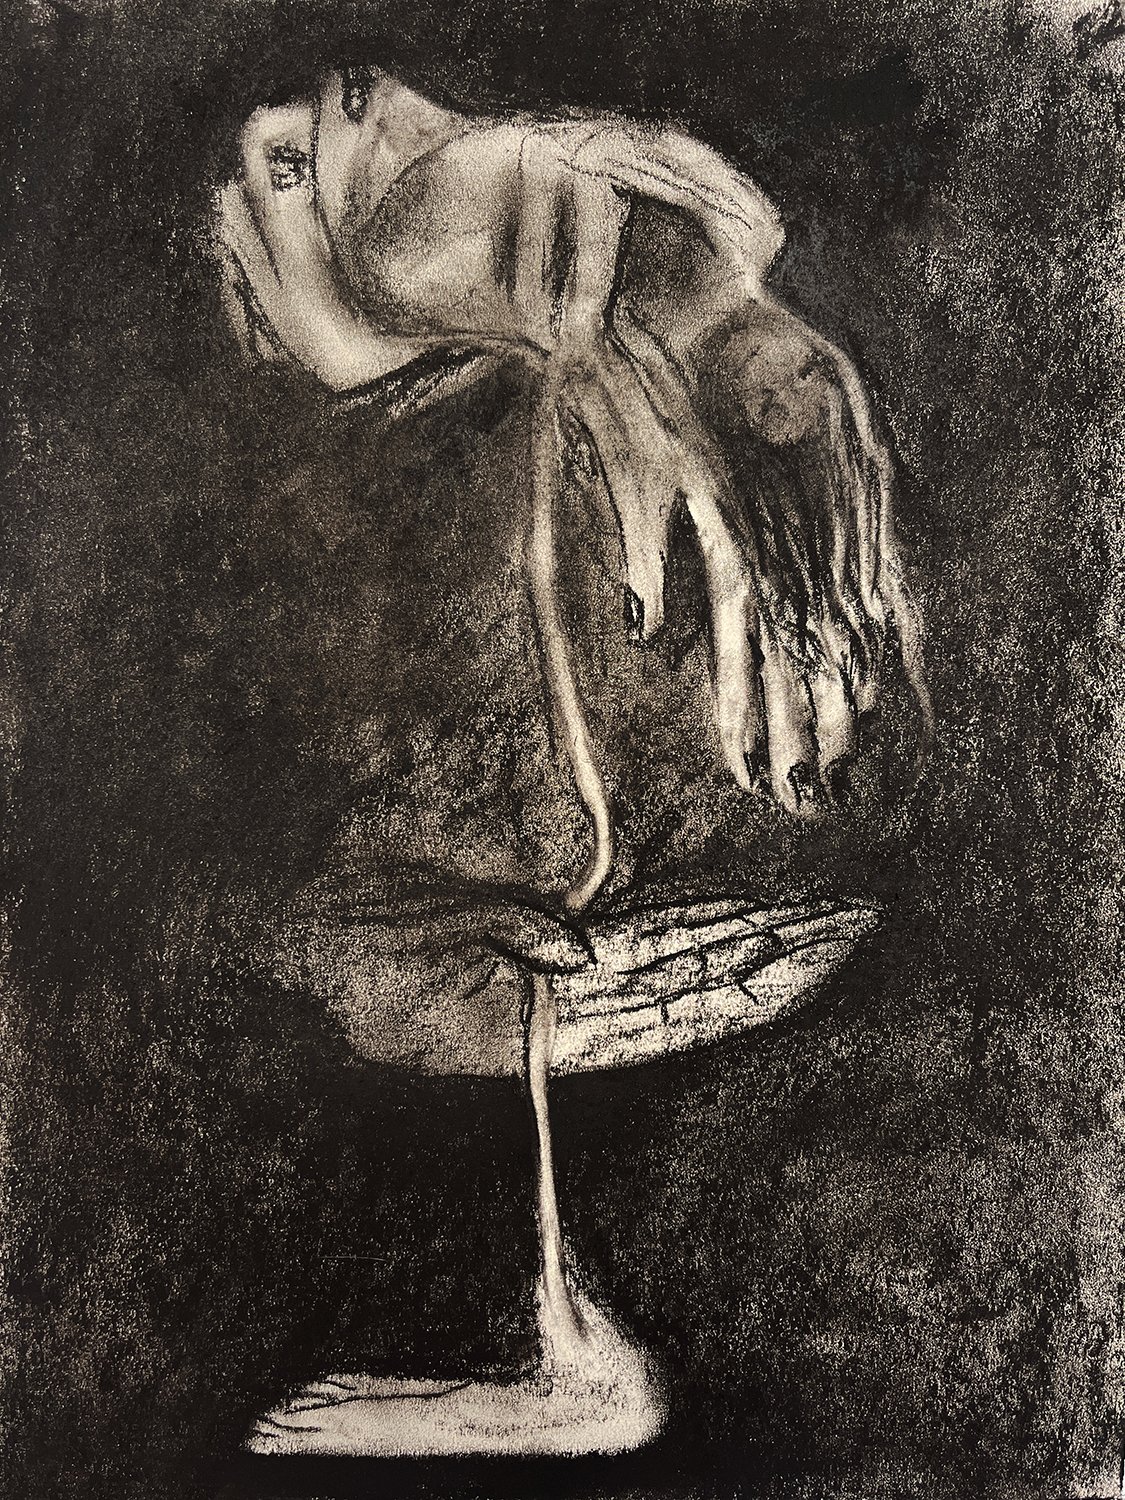 Dreaming of Change / 2022, charcoal on paper, 30 x 40 cm